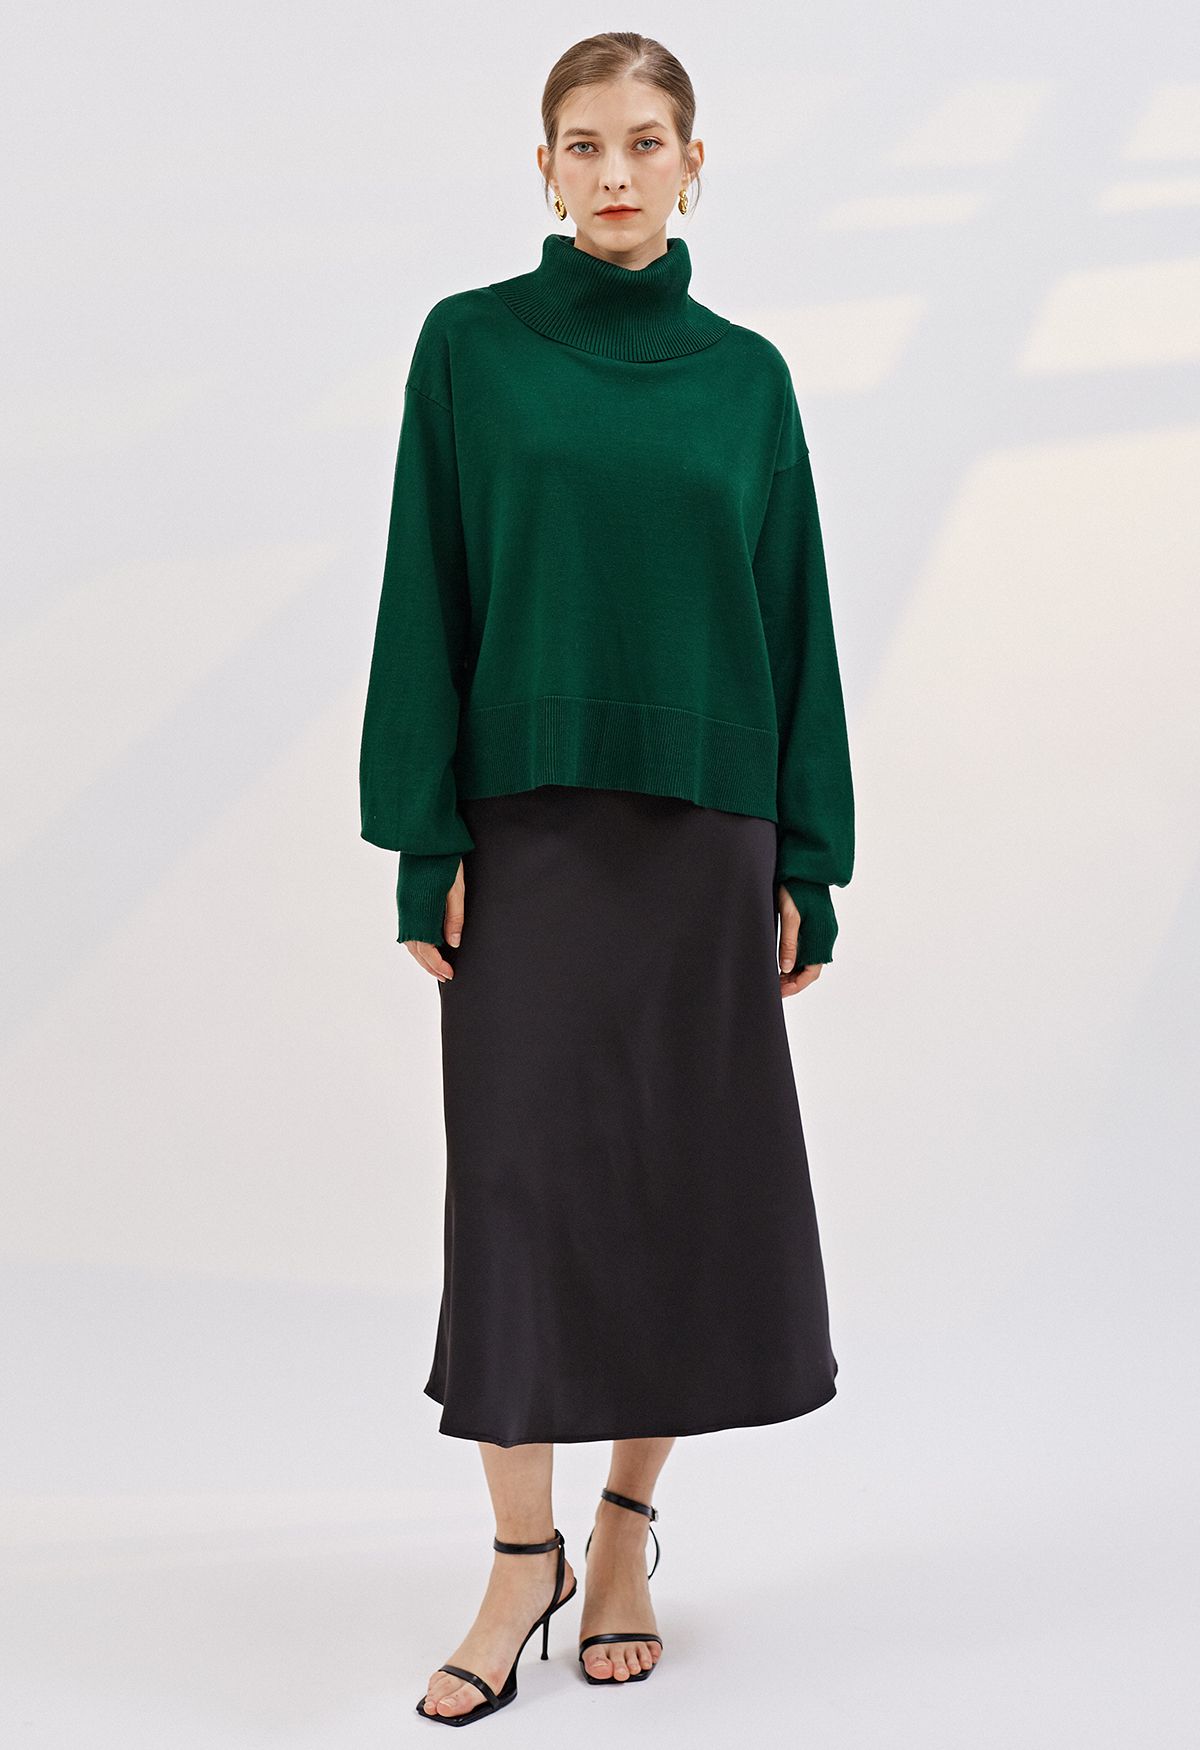 Turtleneck Side Buttons Slouchy Knit Top in Dark Green